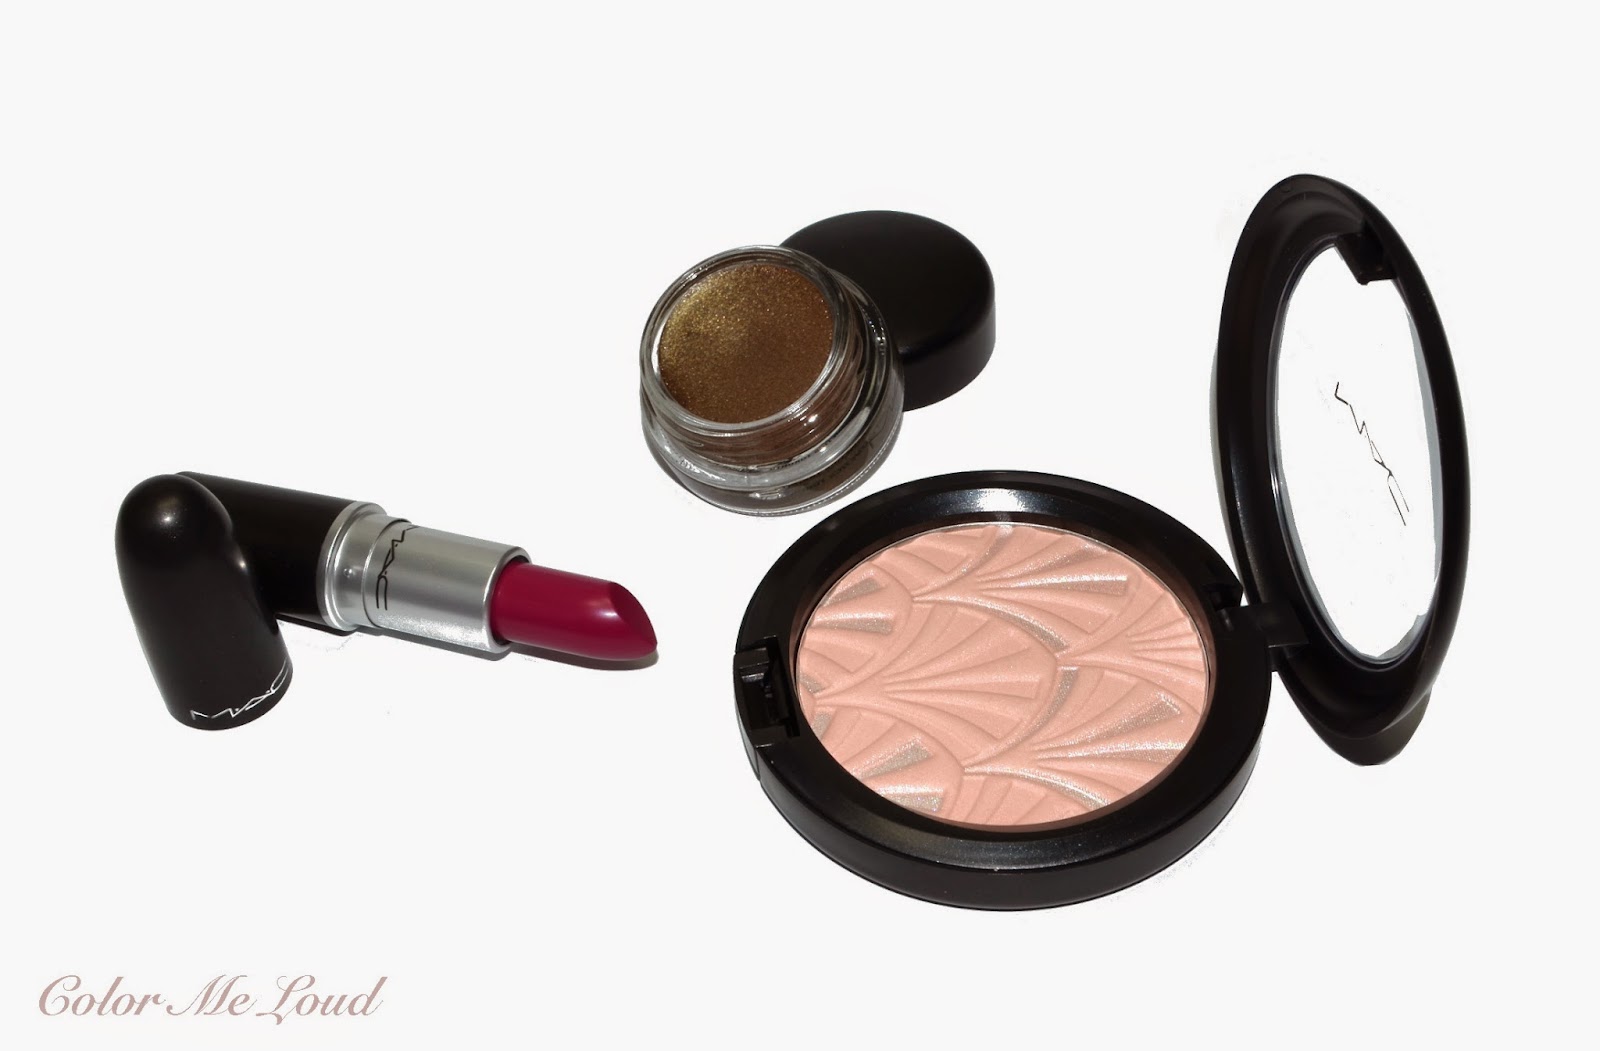 My Picks from MAC Philip Treacy Collection, Pro Longwear Paint Pot Genuine Treasure, Hollywood Cerise Lipstick and Highlight Powder in Blush Pink, Review, Swatch, Comparison & FOTD